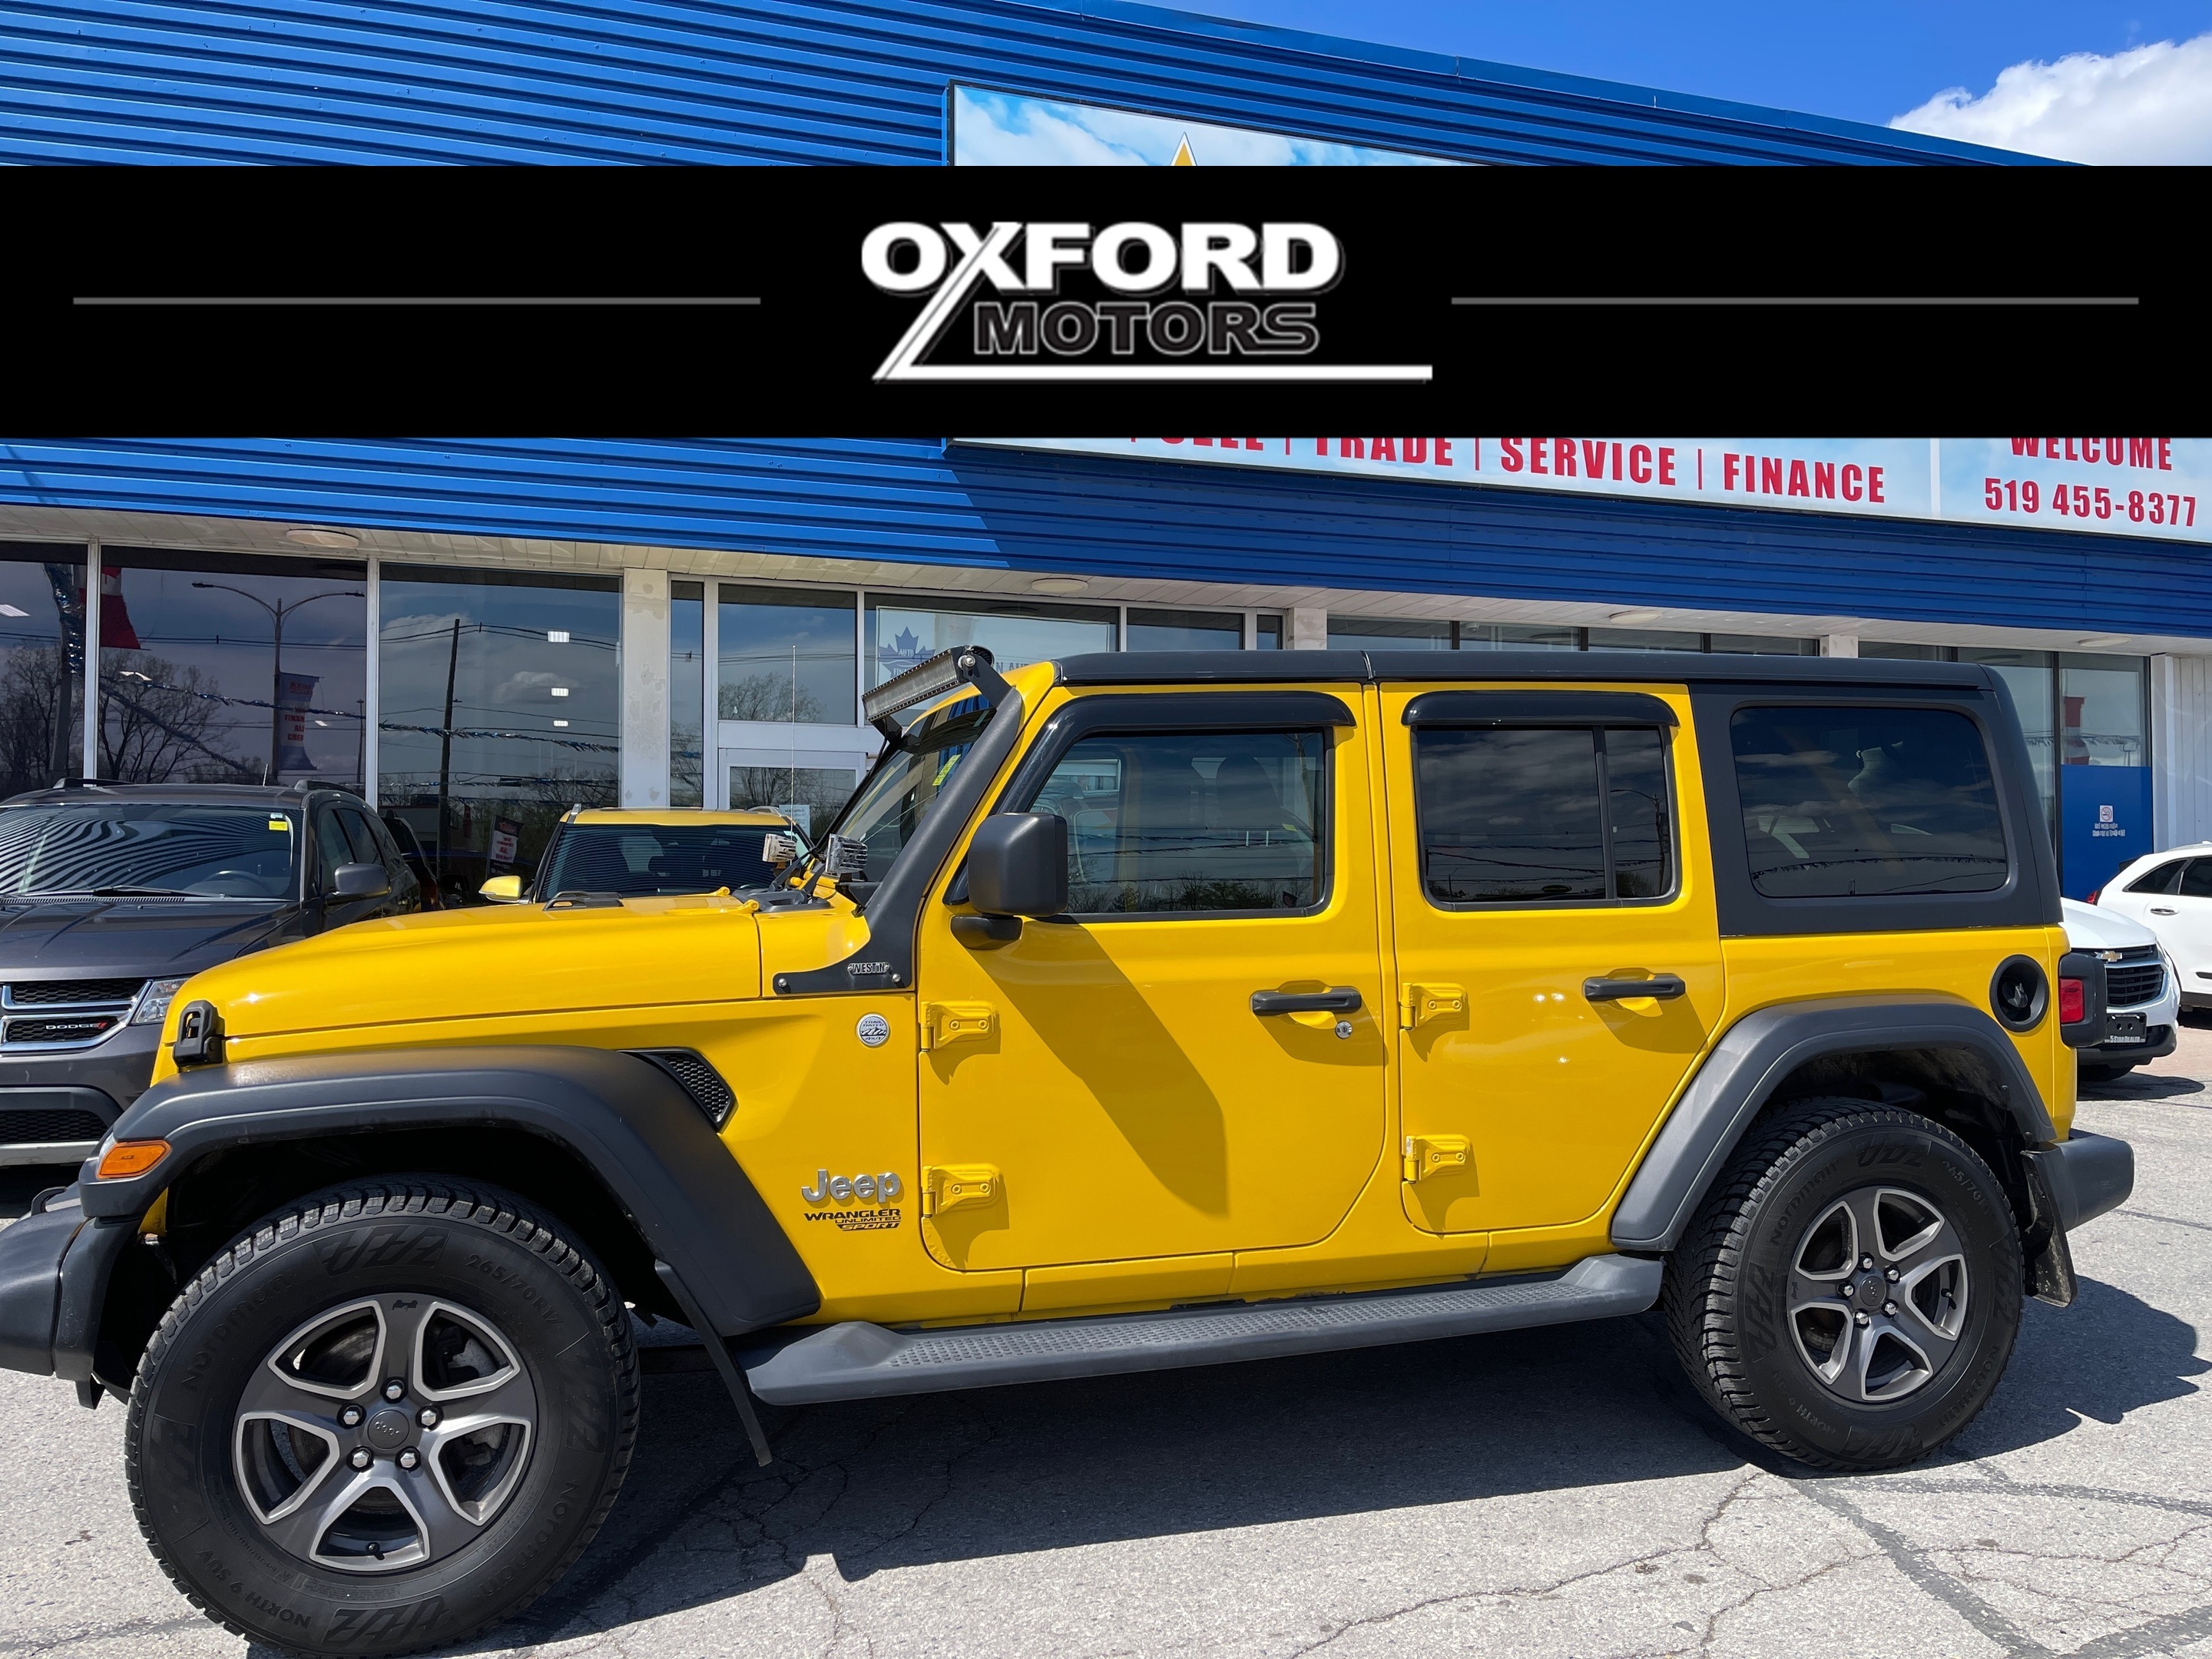 2019 Jeep WRANGLER UNLIMITED 4x4 2 TOPS LOTS OF  OPTIONS  WE FINANCE ALL CREDIT